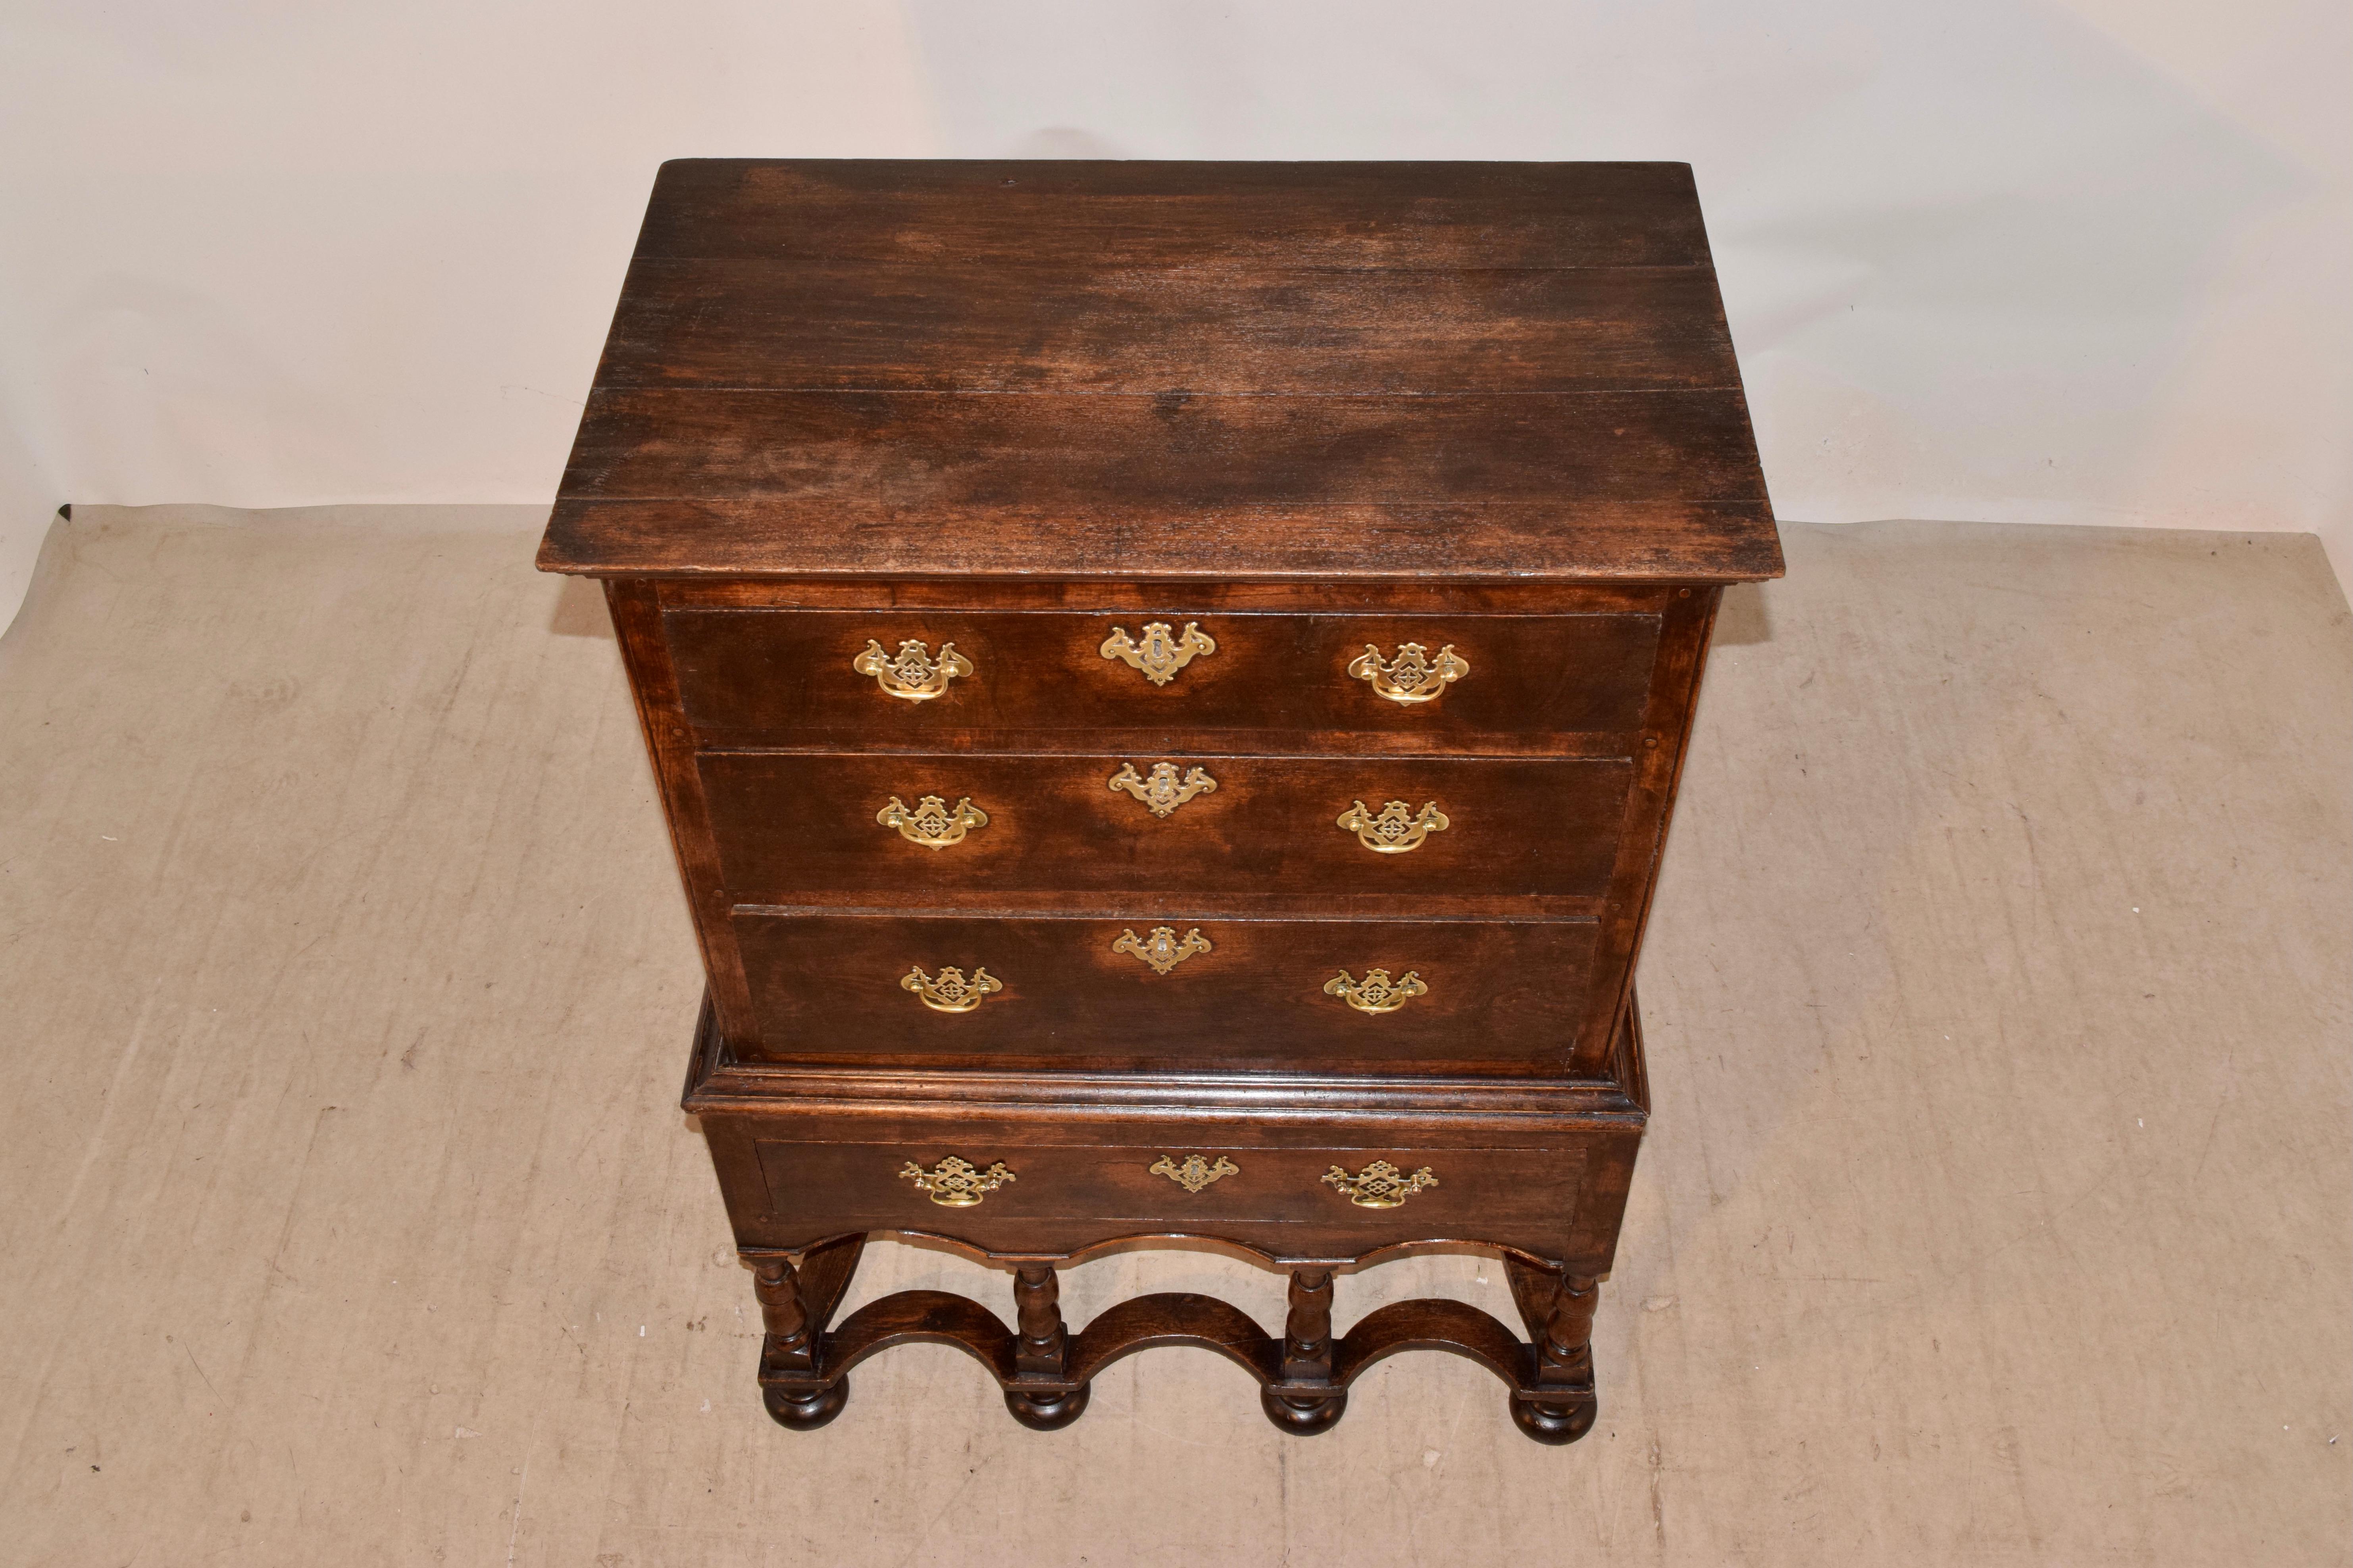 Early 18th century chest on stand from England made from oak. It has pegged construction throughout and features raised paneled sides and three drawers in the top portion of the chest. This rests on the base, which contains a single drawer over a